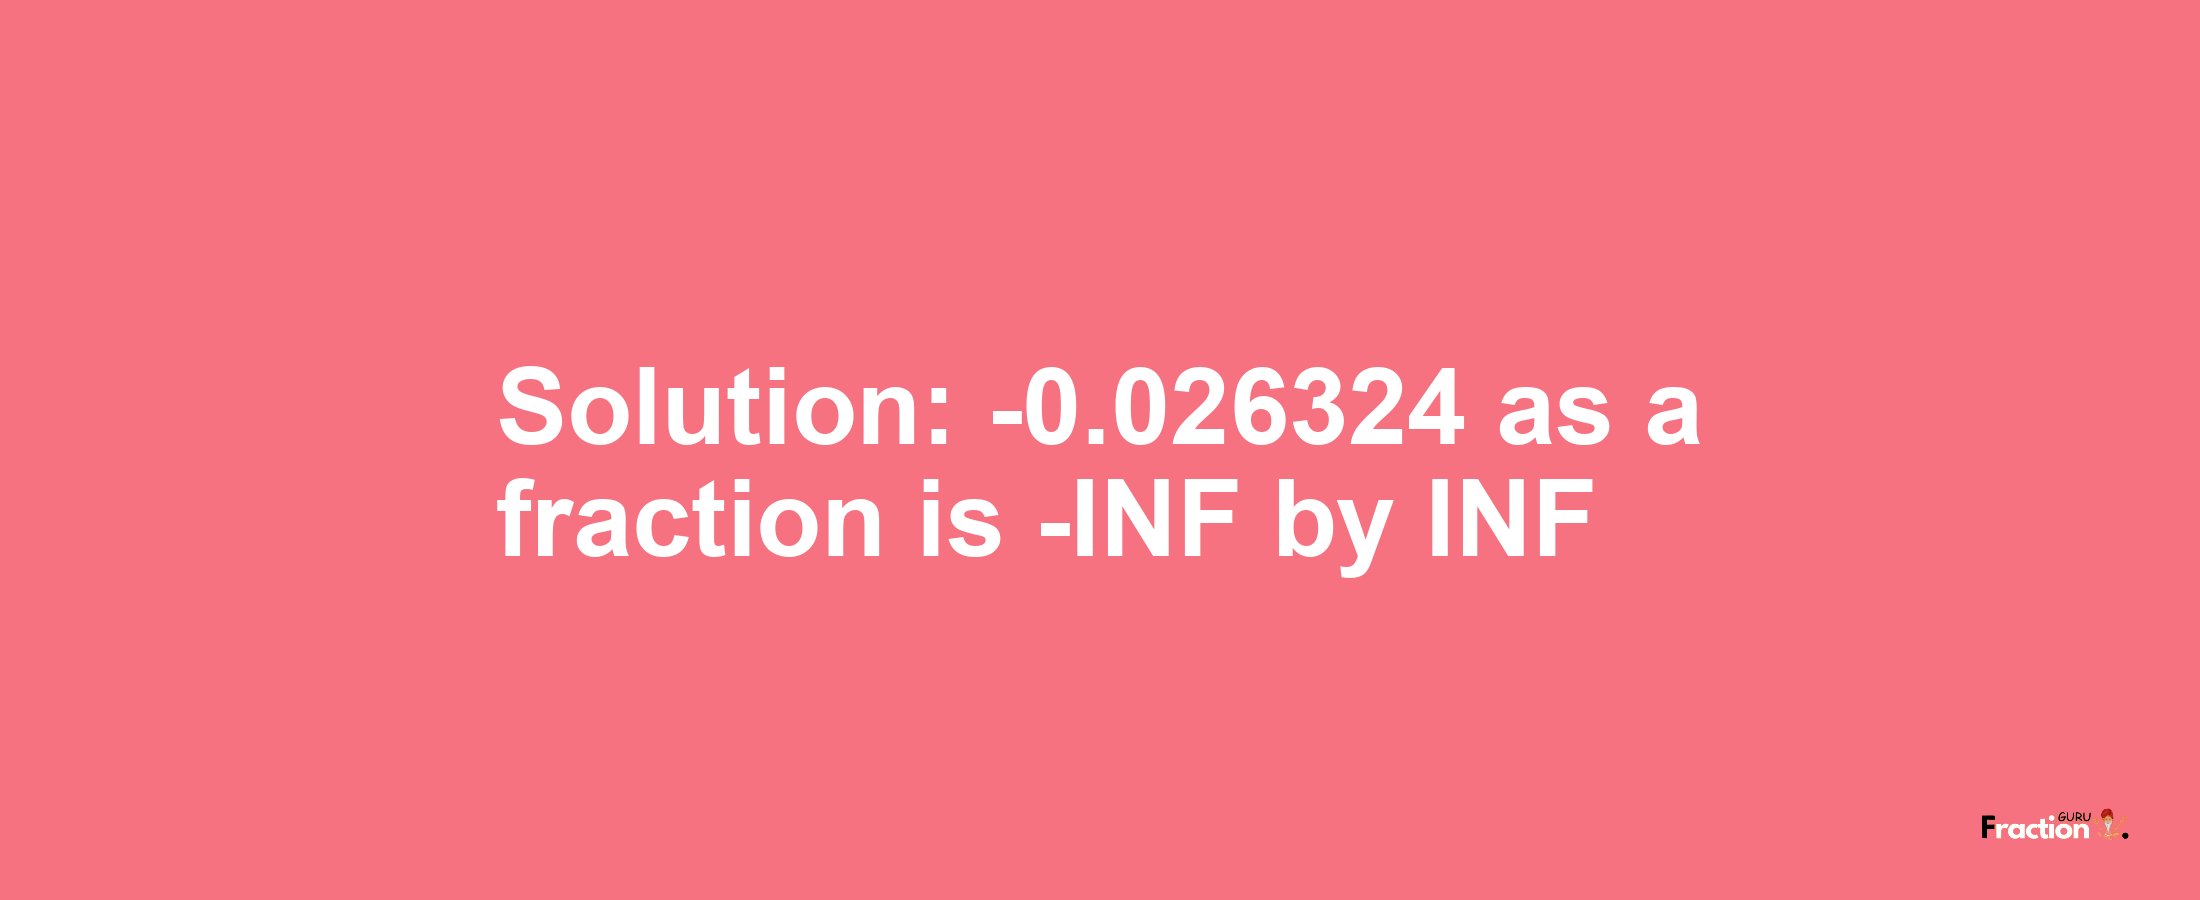 Solution:-0.026324 as a fraction is -INF/INF